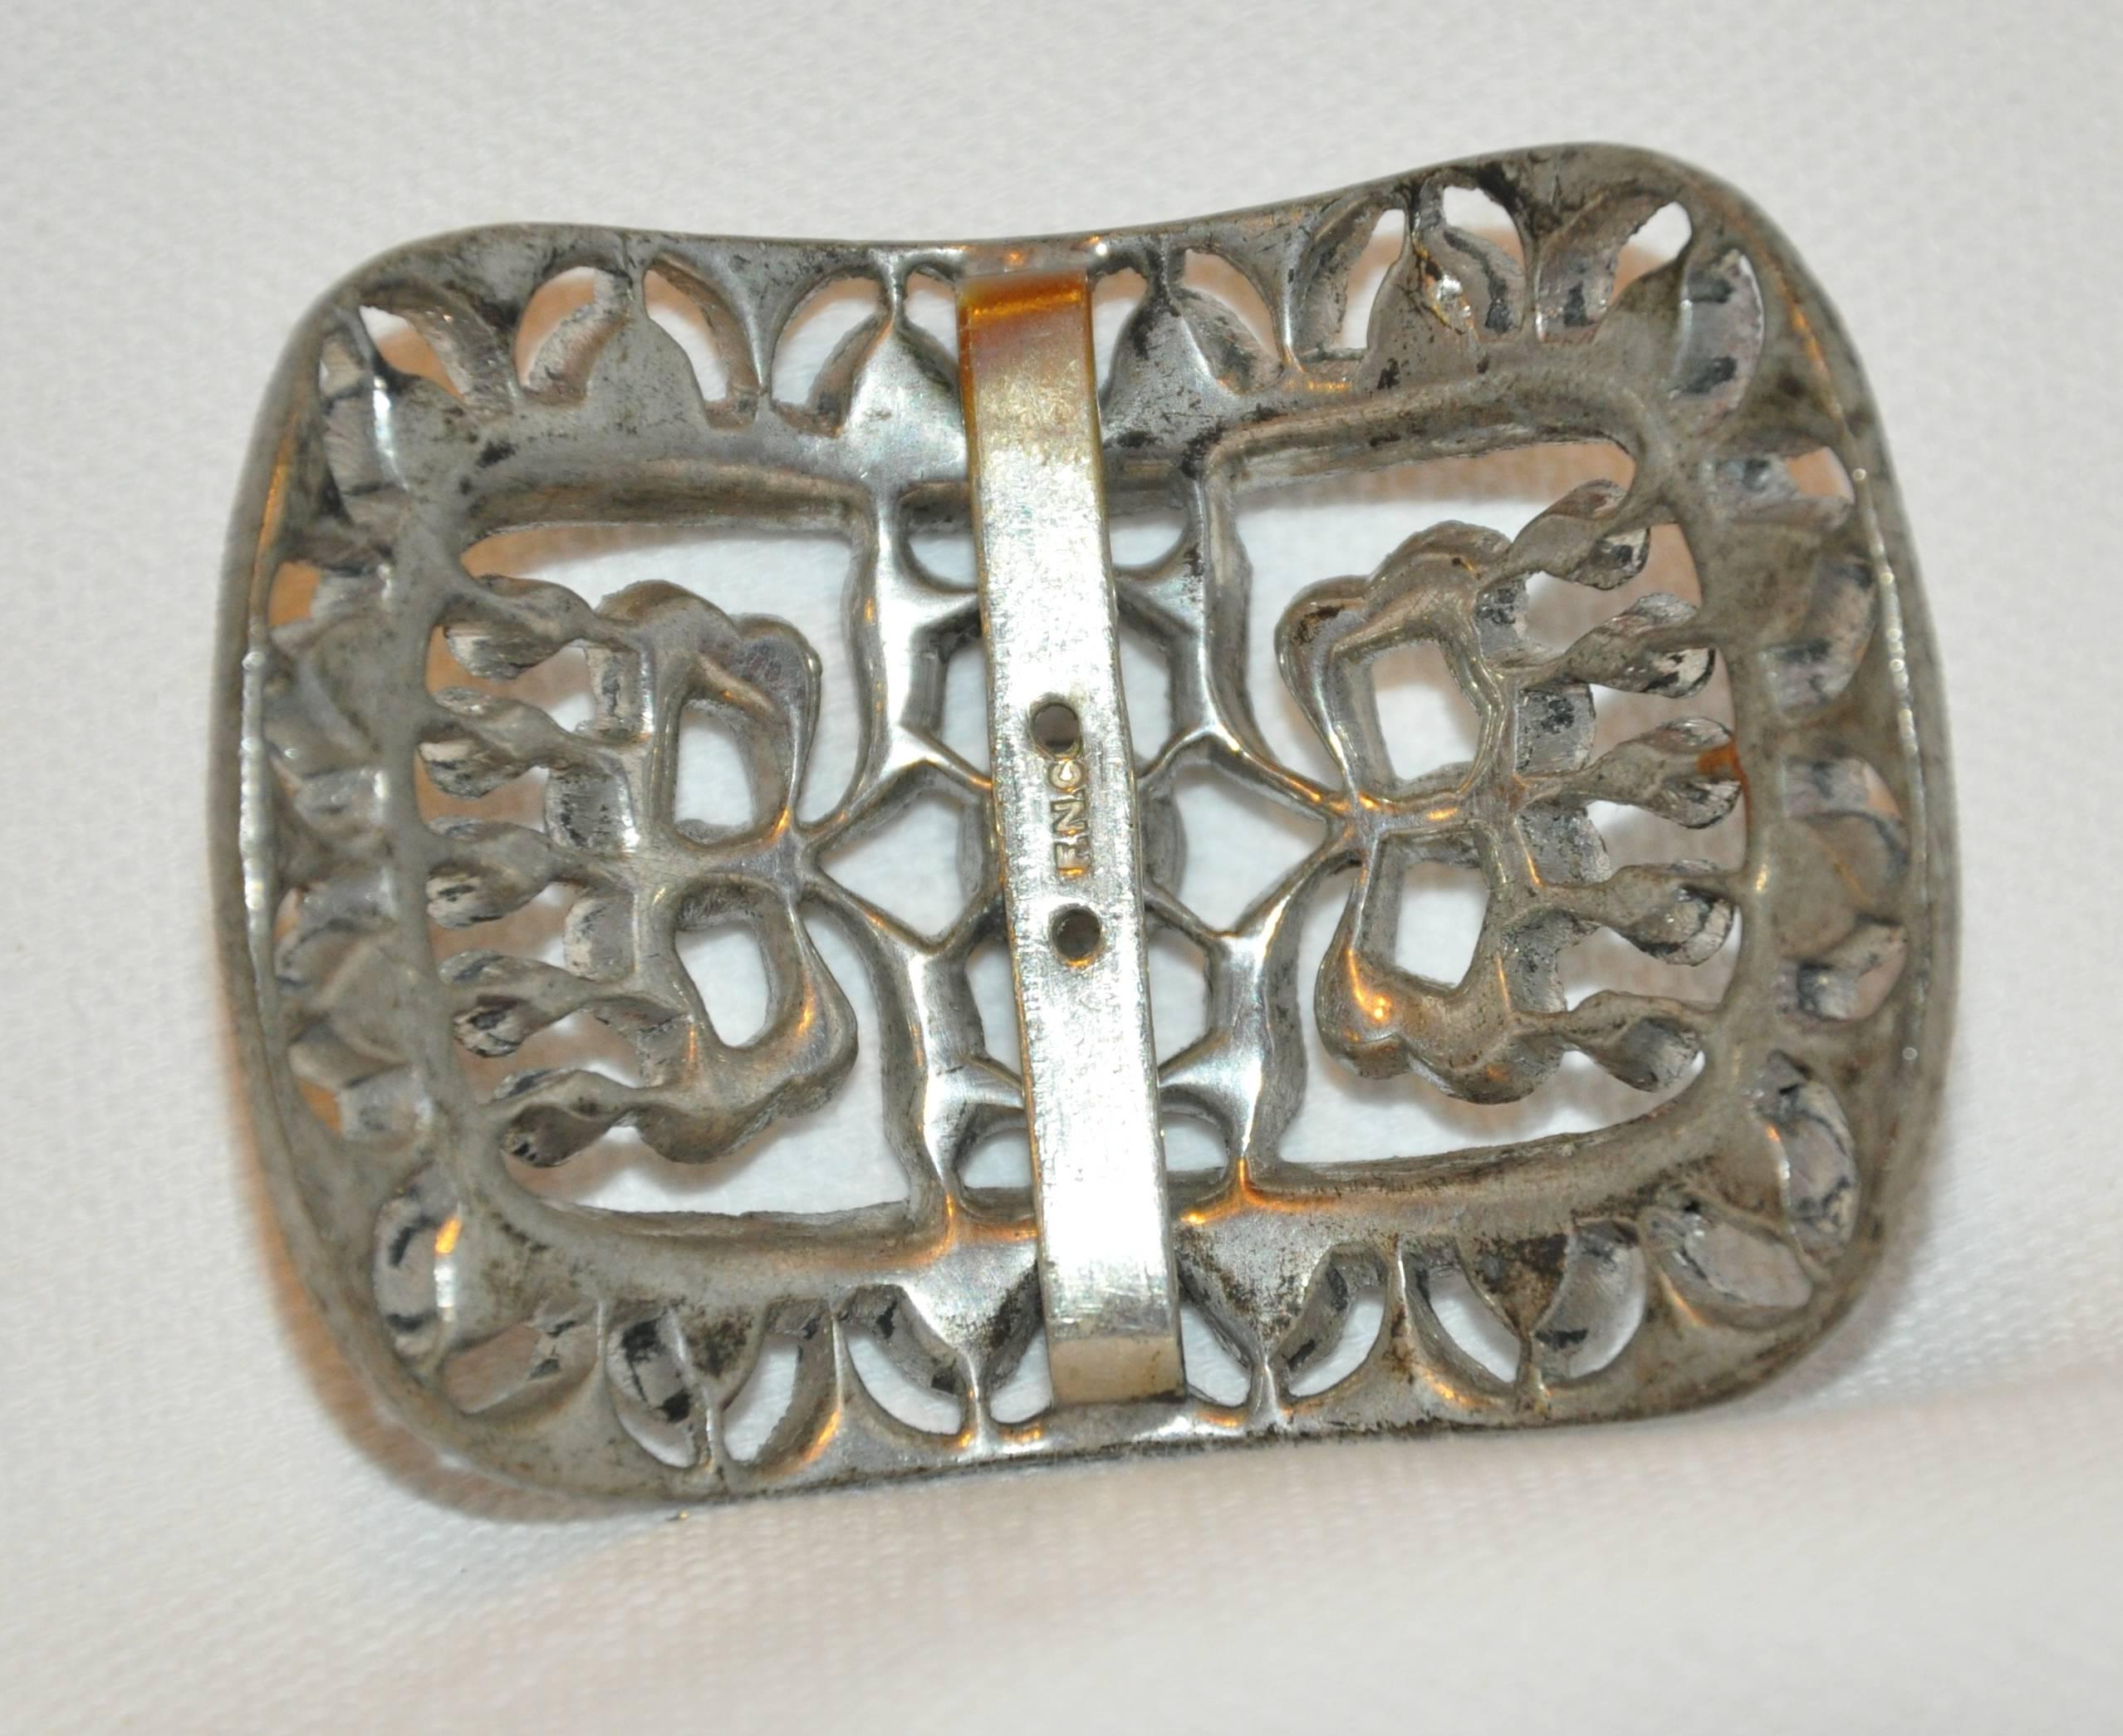        This beautifully detailed vintage gilded silver hardware belt buckle is accented with multi faux diamonds and highlighted with a single large faux diamond center. The buckle measures 2 1/2 inches x 1 1/2 inches. Depth measures 1/2 inch.